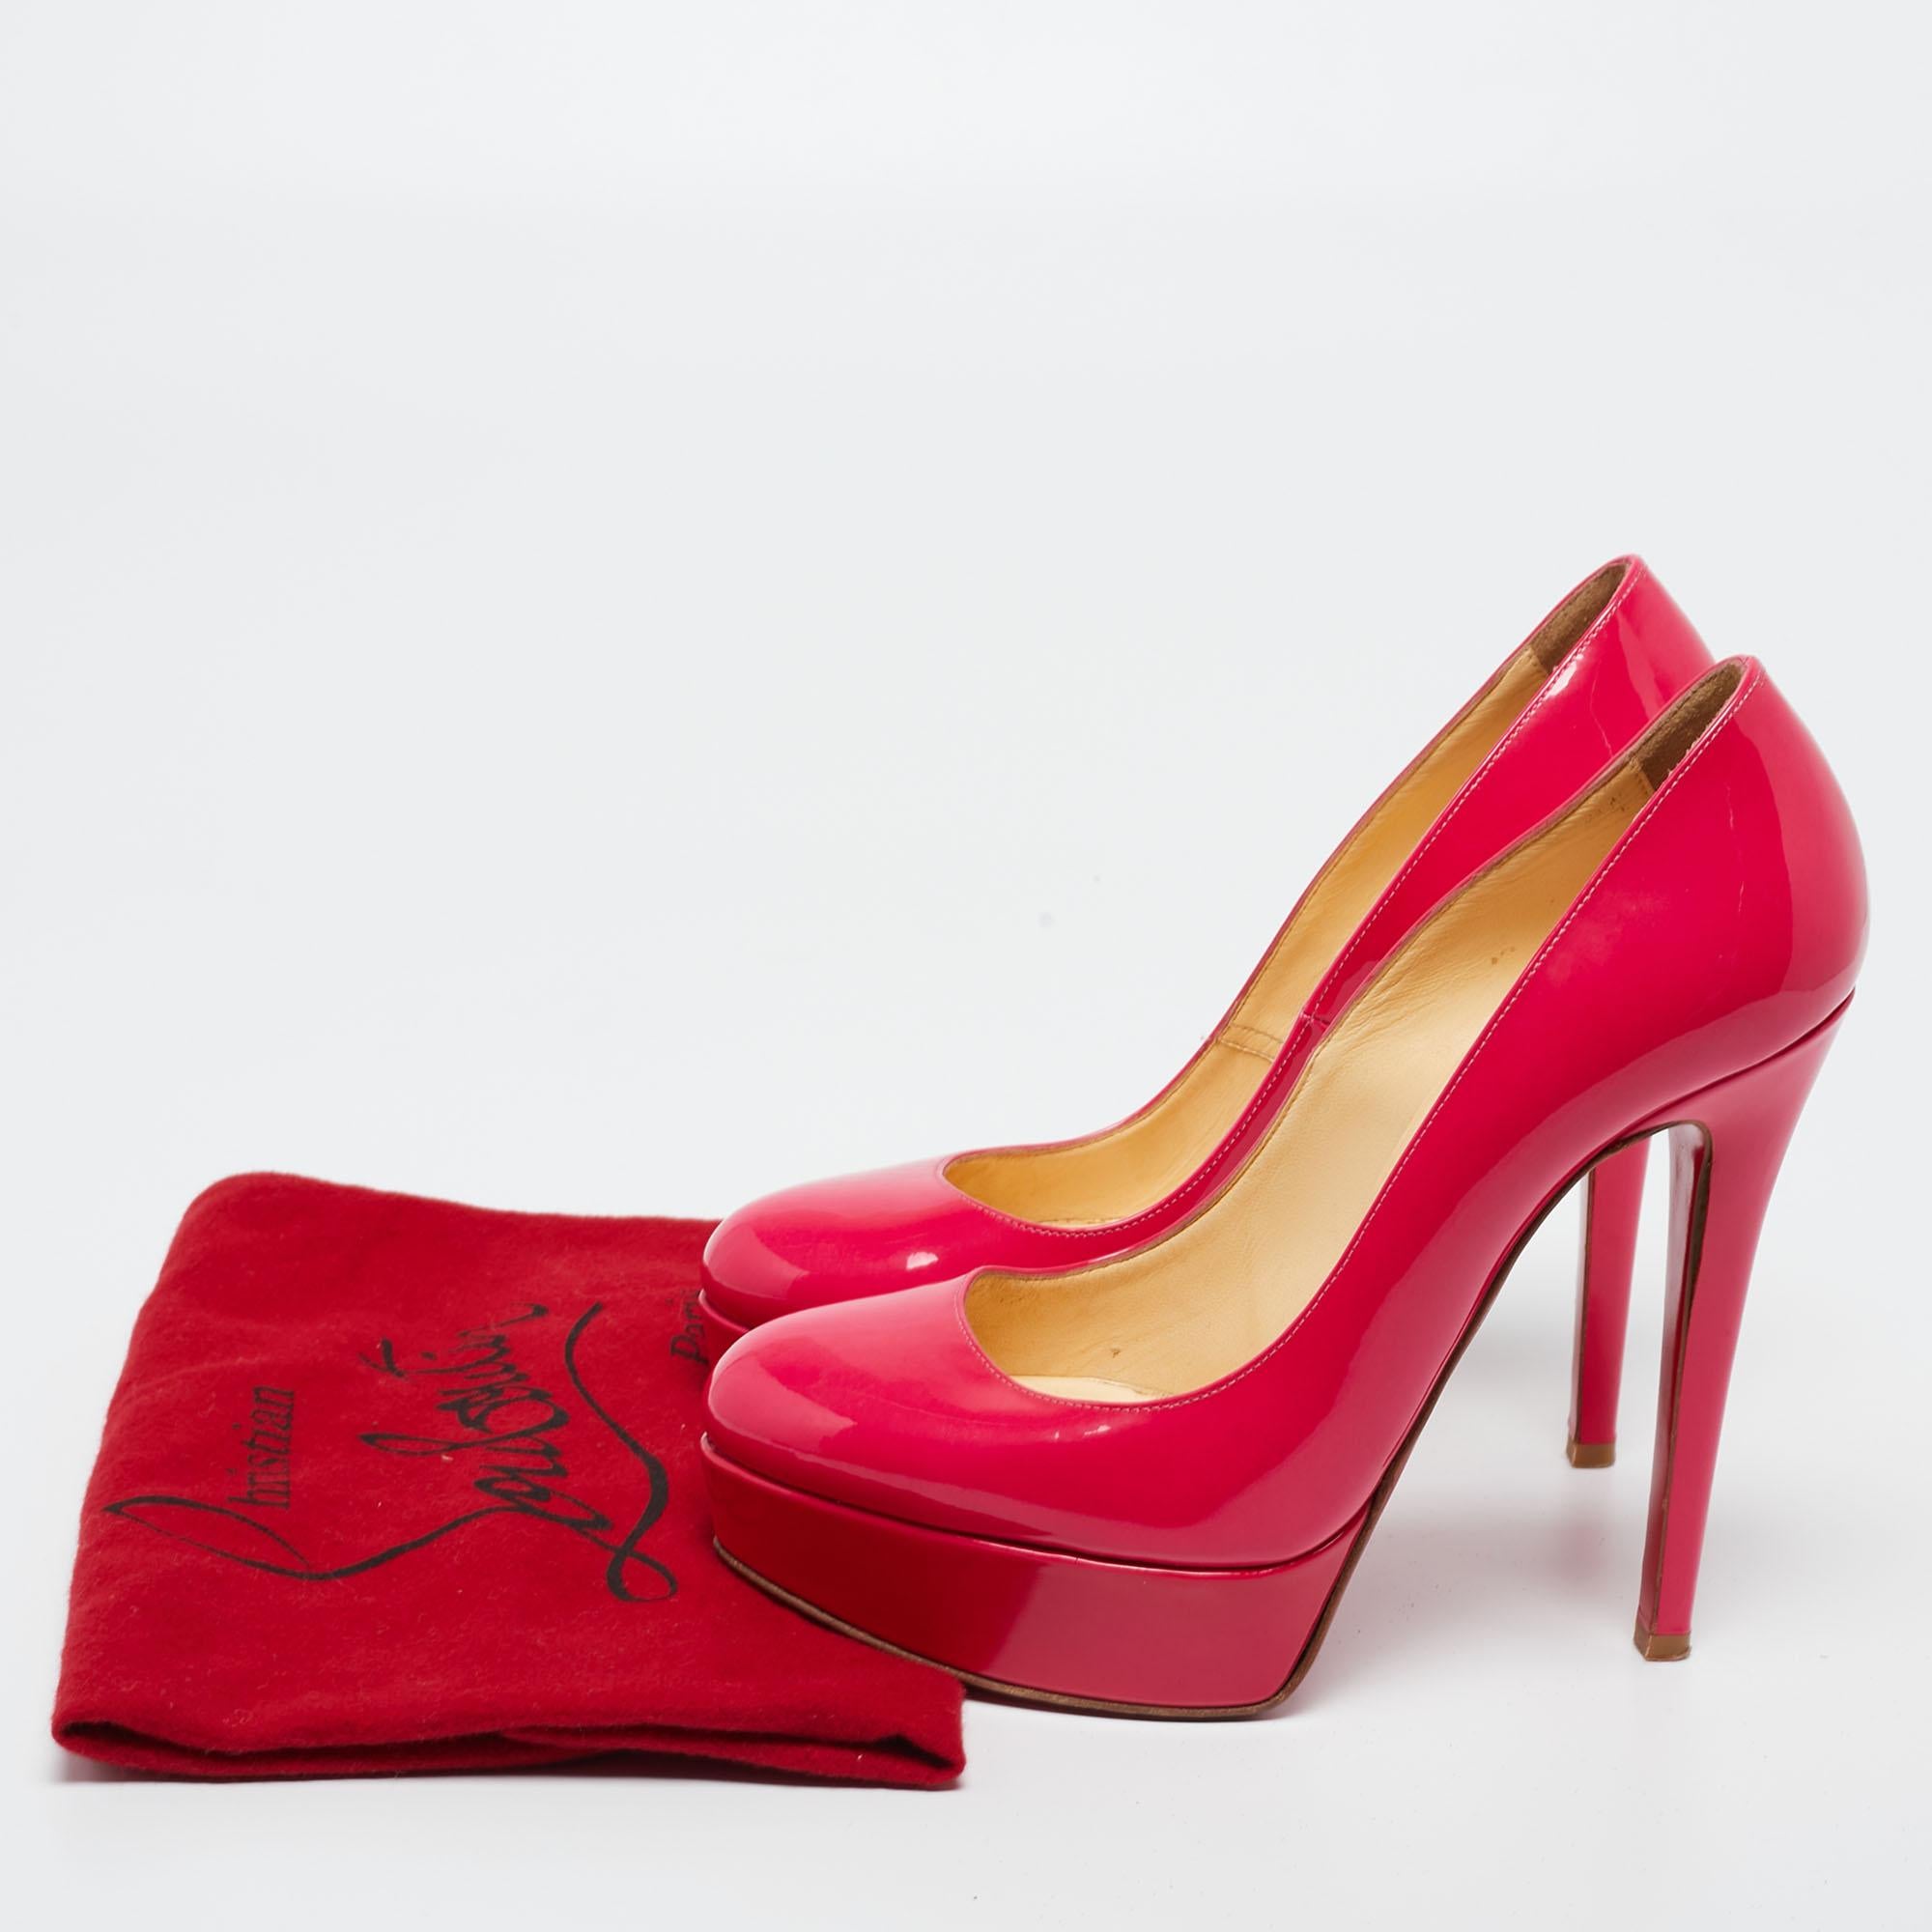 Christian Louboutin Neon Pink Patent Leather Bianca Pumps Size 36 For Sale 5